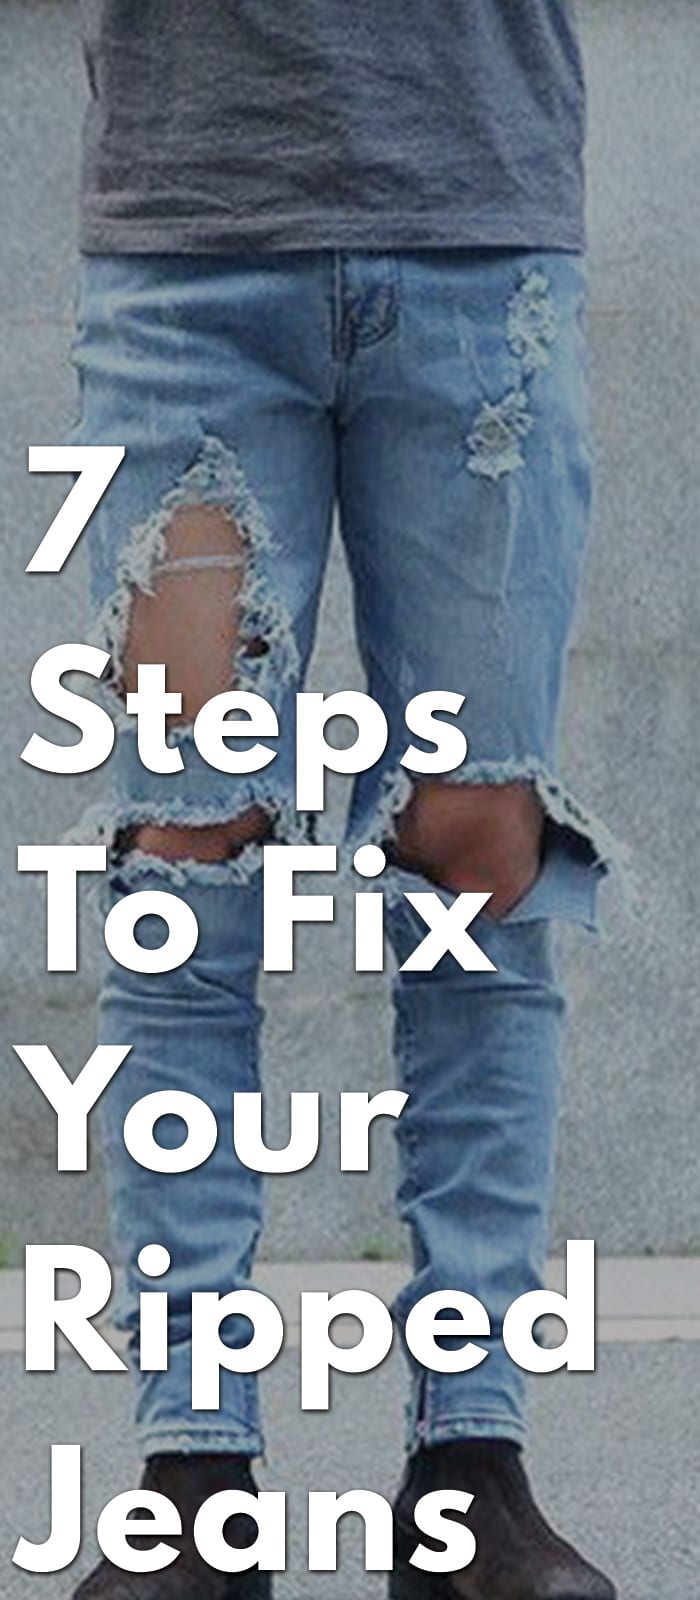 7-Steps-To-Fix-Your-Ripped-Jeans